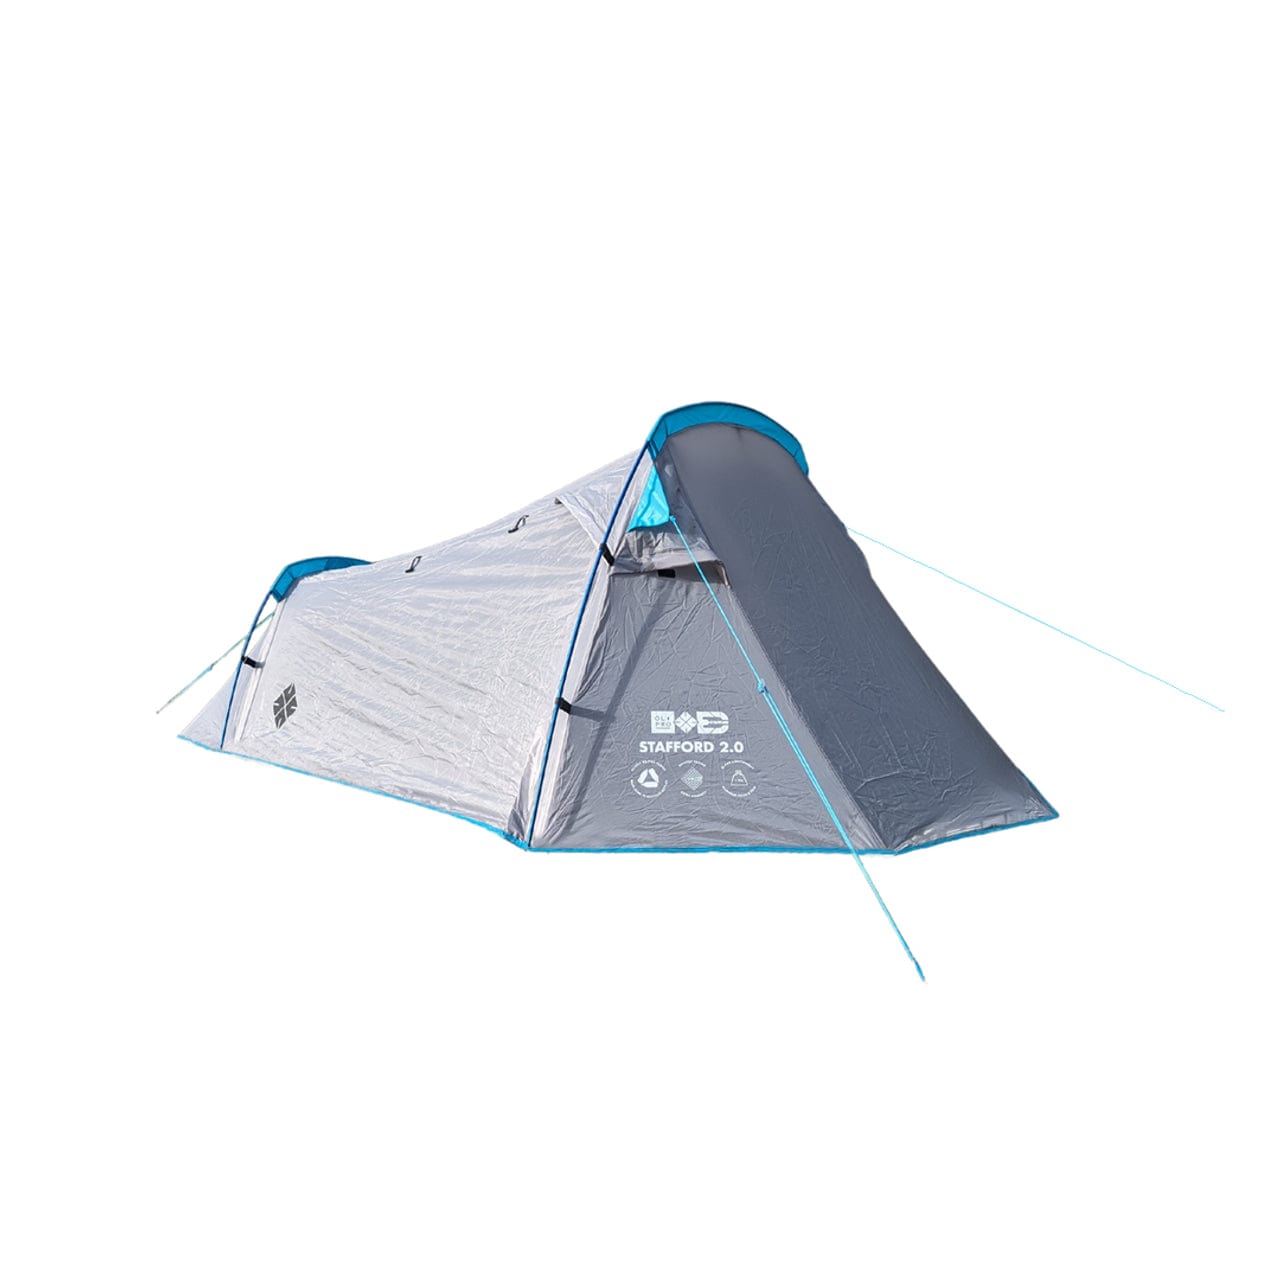 The Stafford 2.0 2 Man Tent OLPRO   